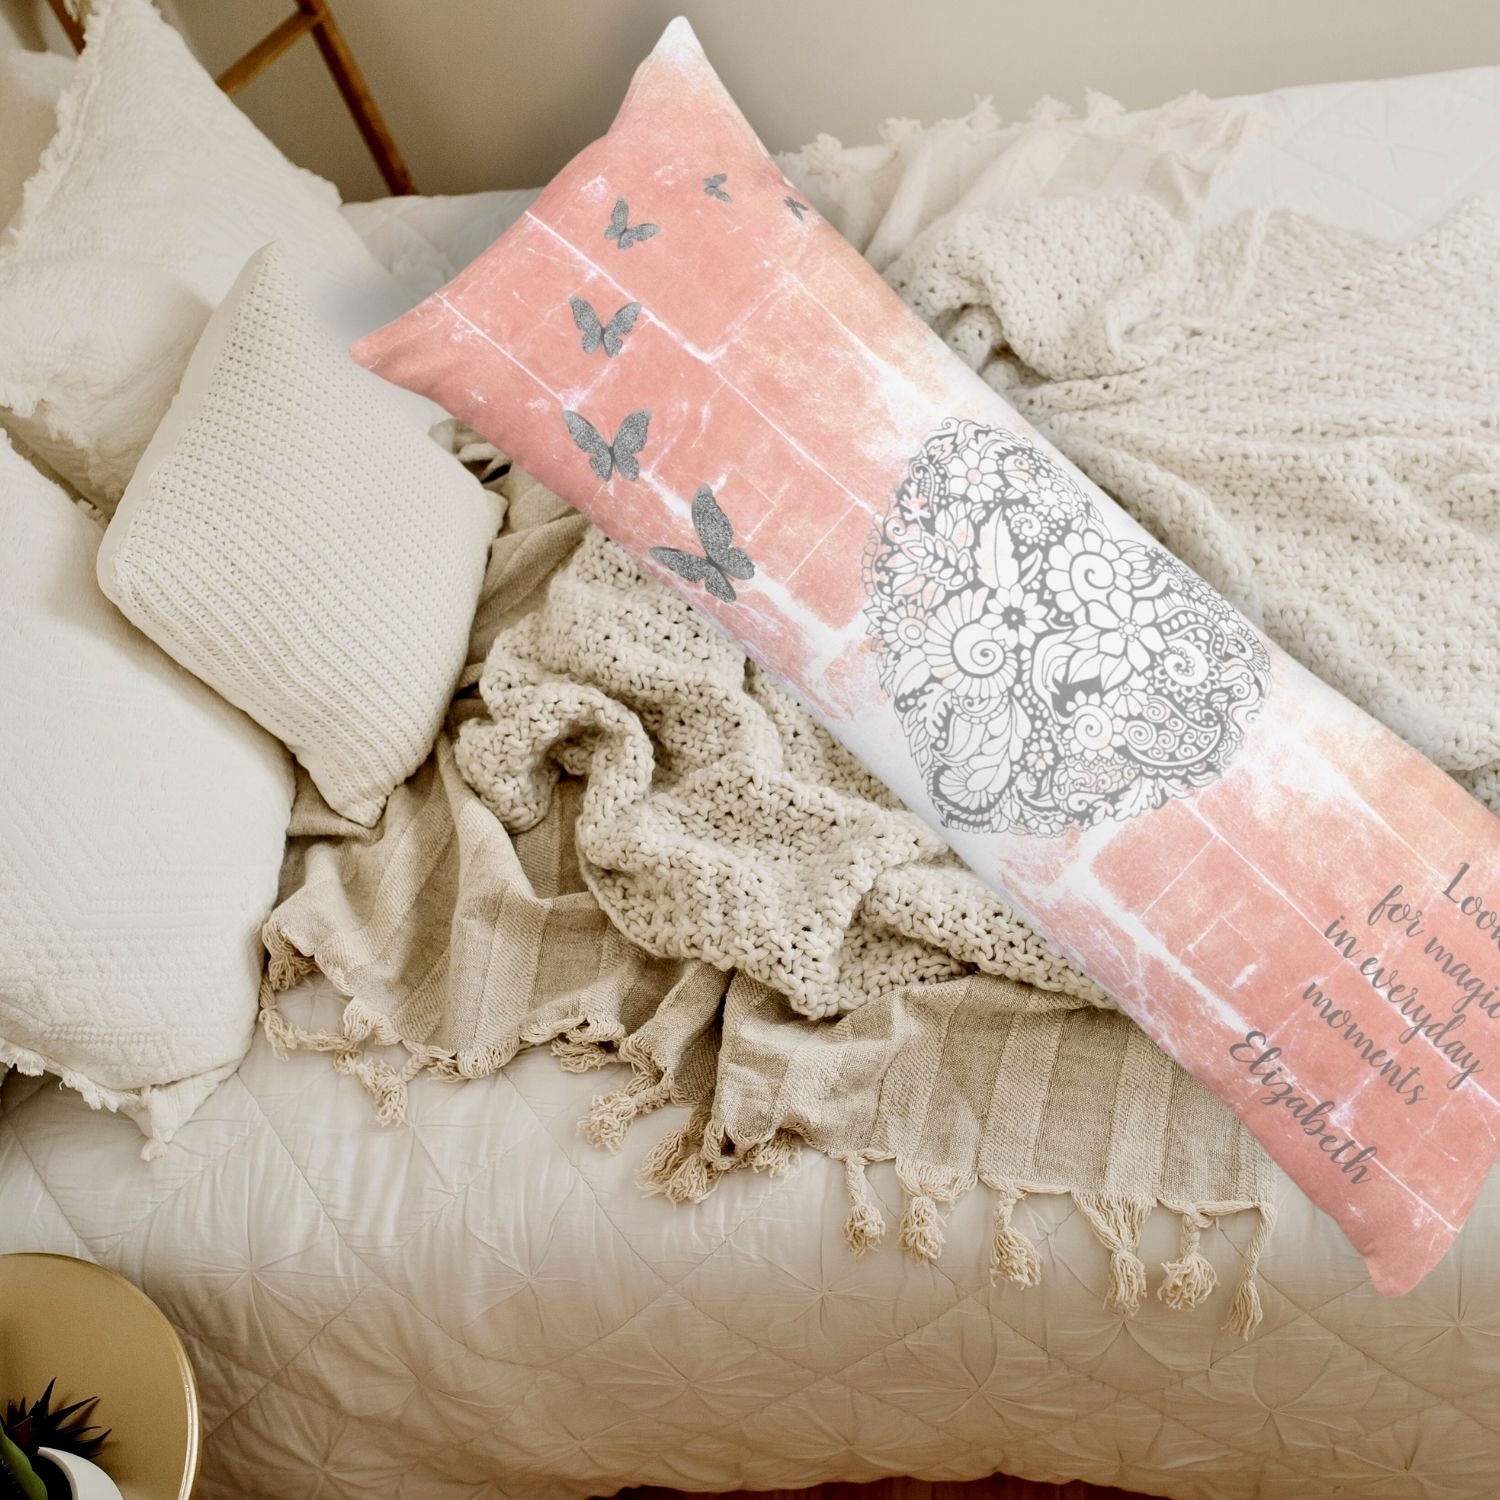 A body pillow resting on a boho beige bed, adding comfort and style to the bedroom decor.